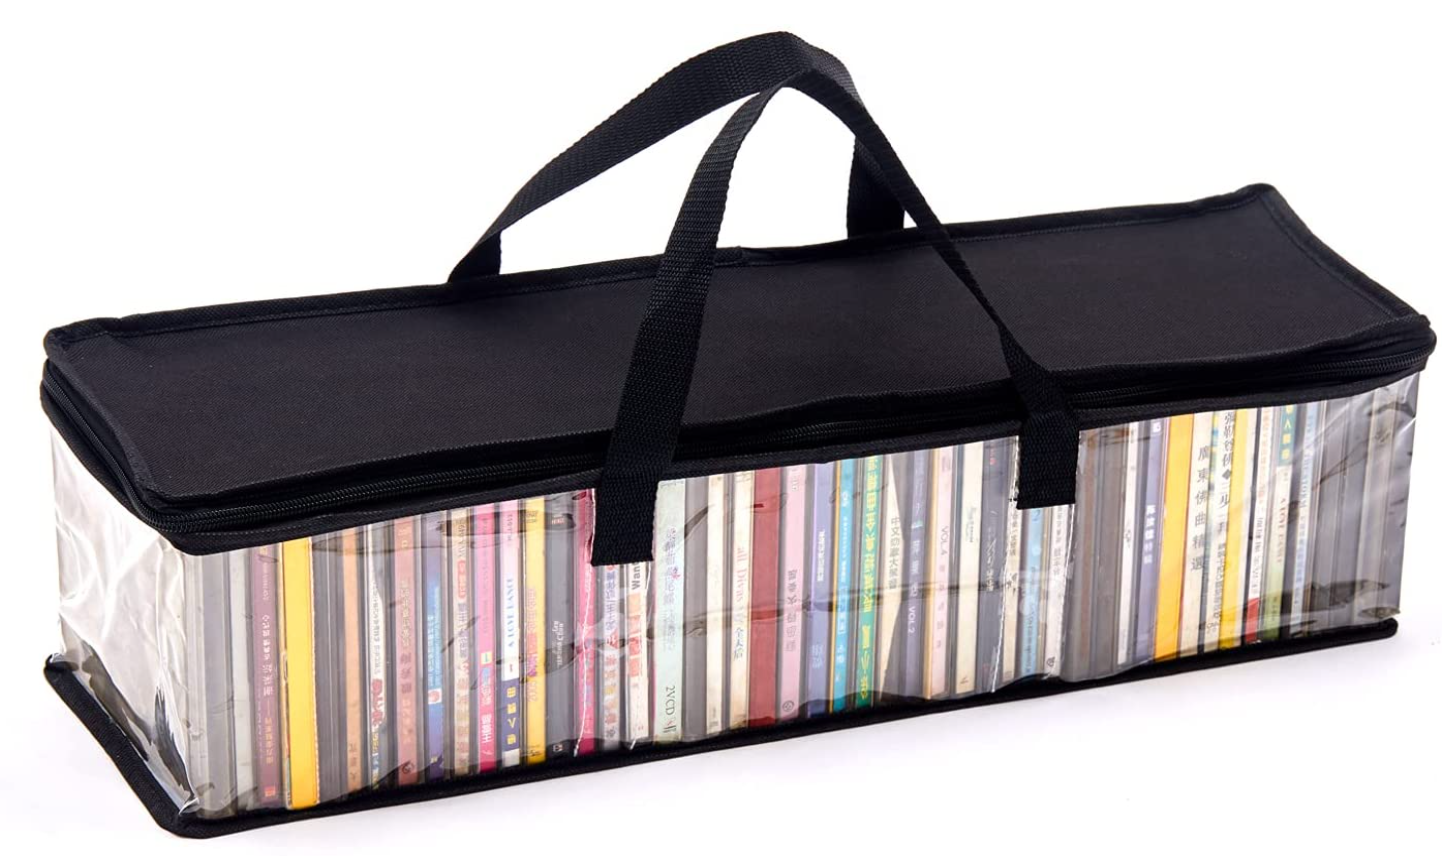 CD Storage Bag Portable Case Max 86% OFF for Selling and selling 48 CDs Zippe 1 Media of Box Set